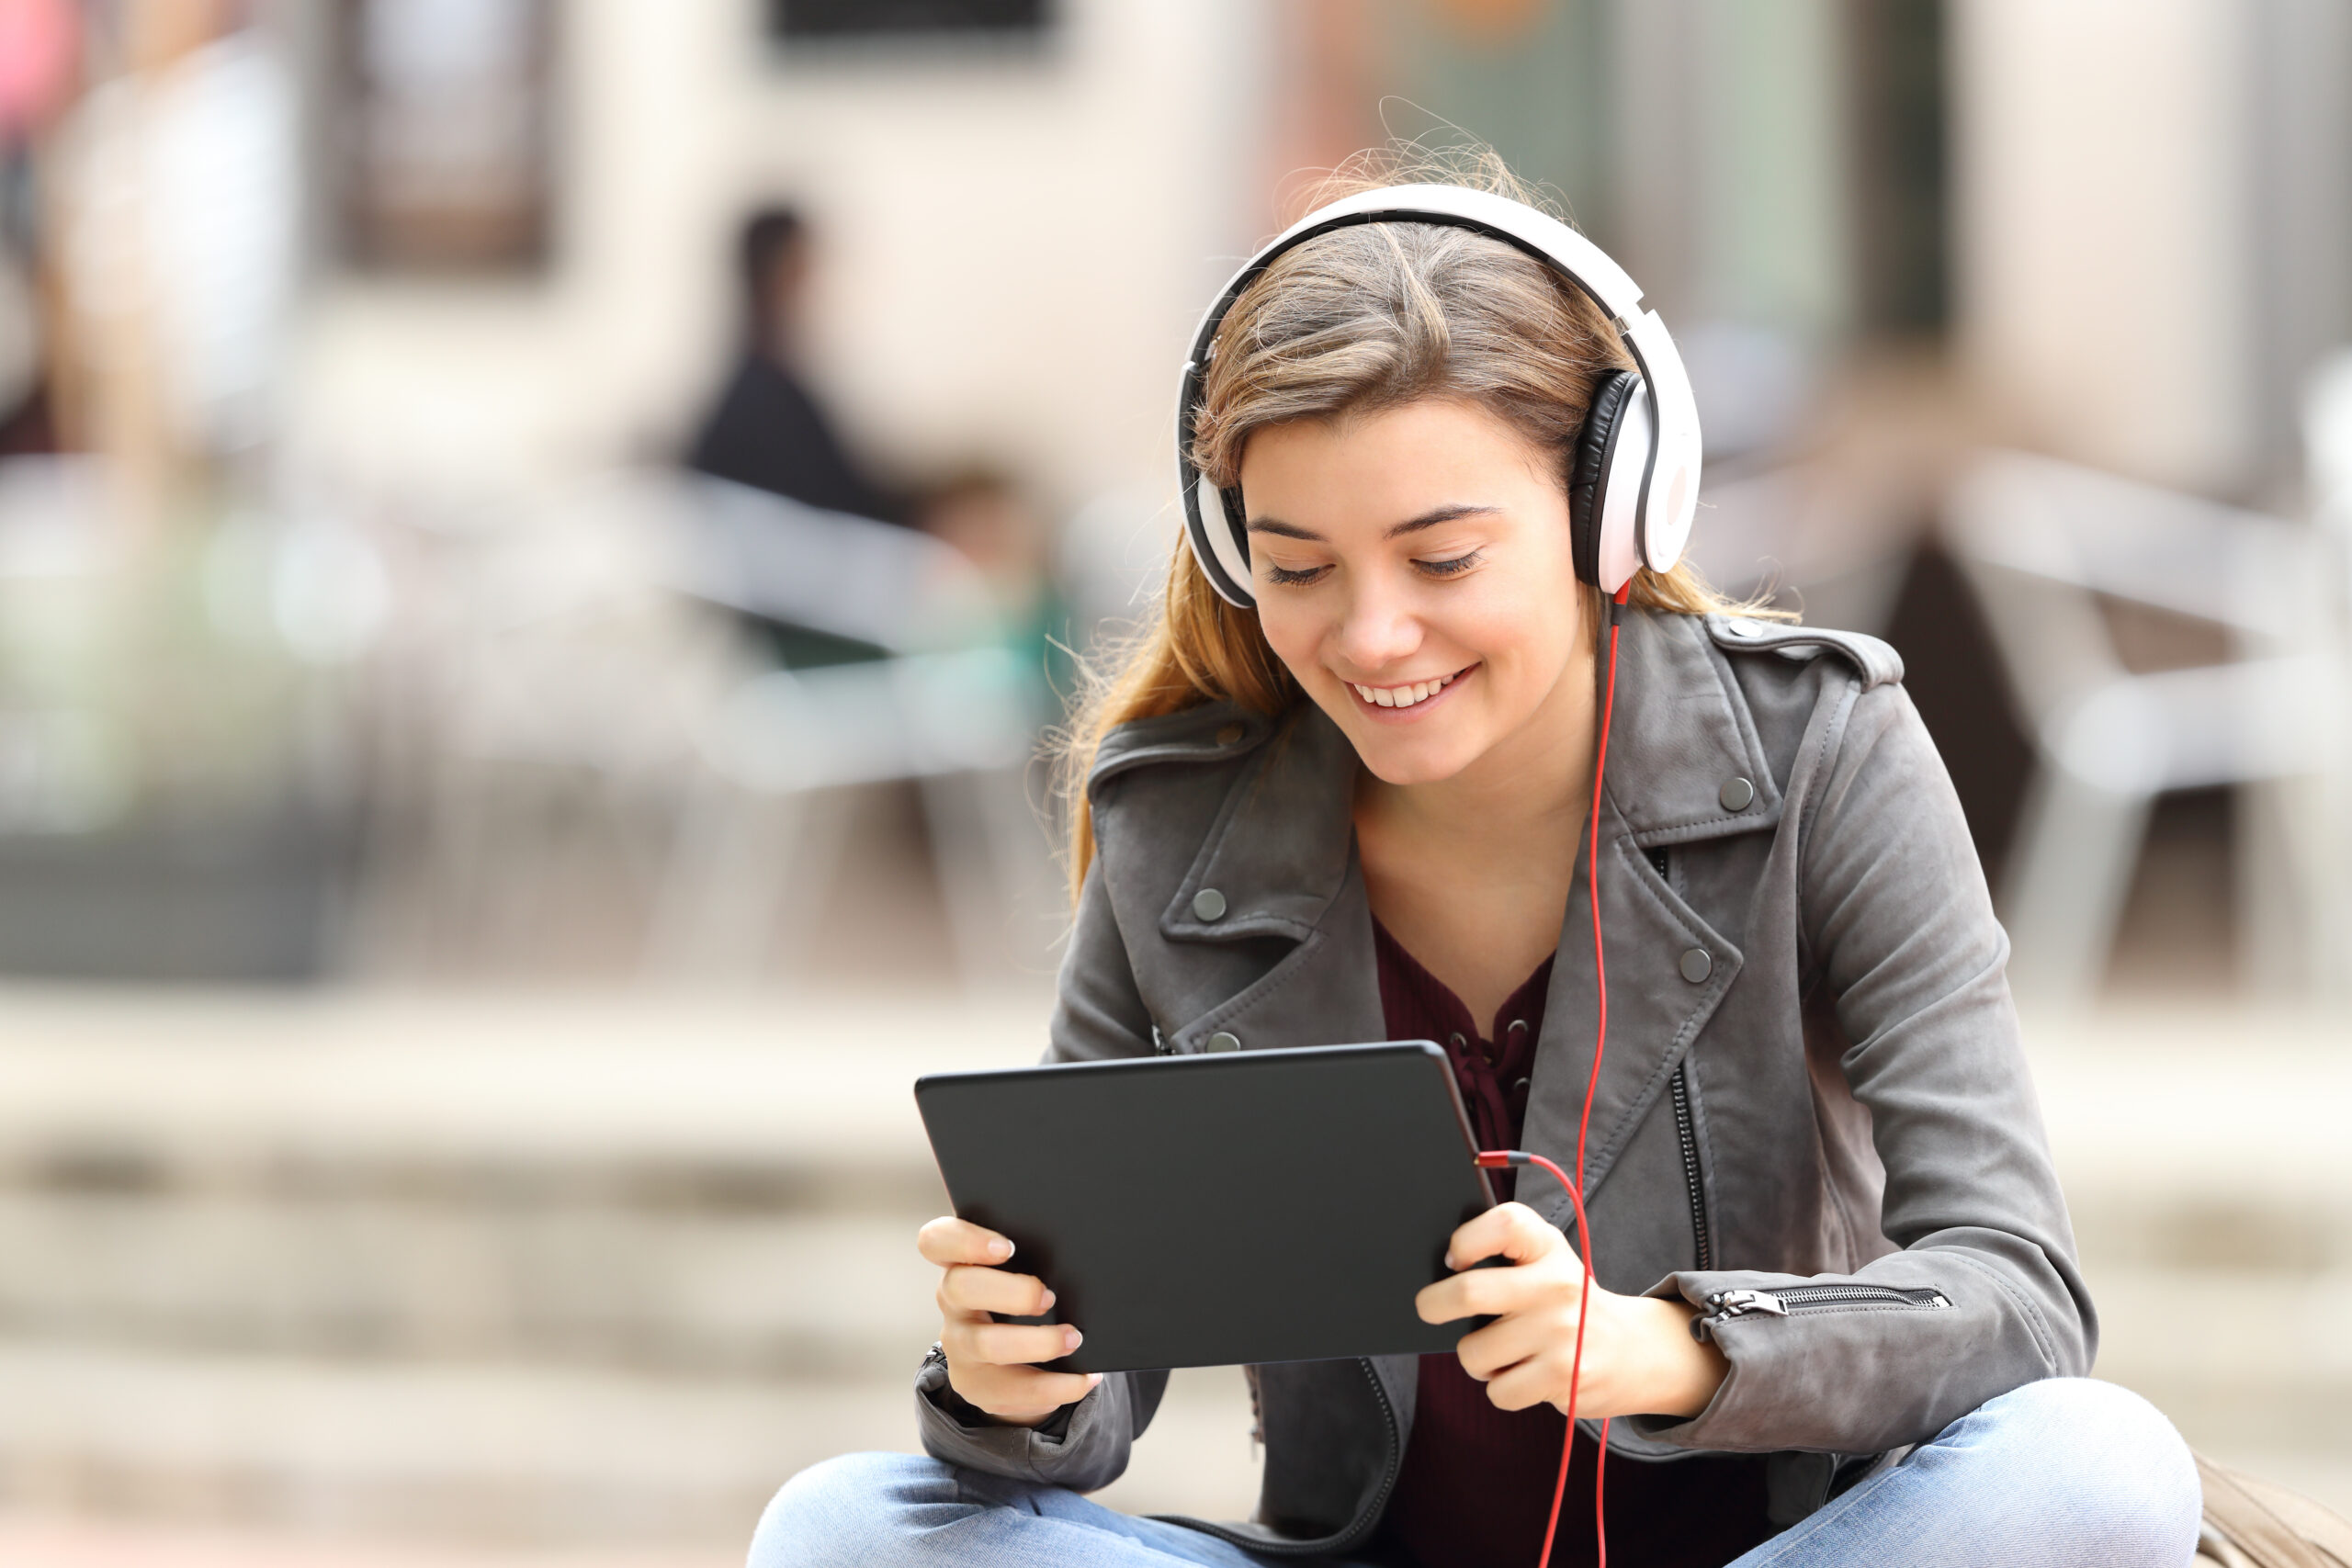 Girl with a tablet and headphones